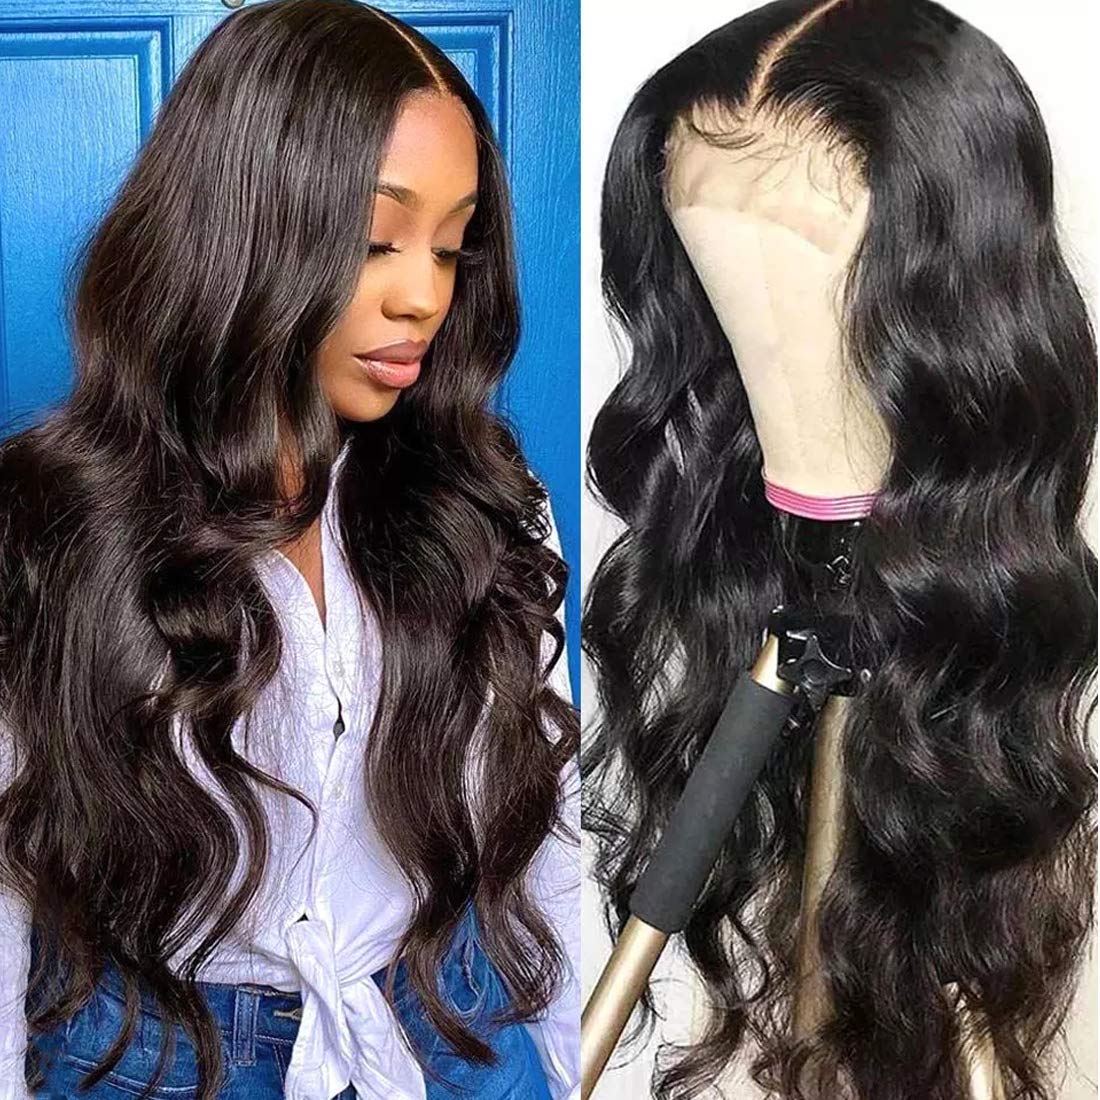 Price:$118.20     Julia Hair Body Wave 4x4 Lace Closure Human Hair Wigs for Women Brazilian Virgin Lace Front Wigs Pre Plucked with Baby Hair Natural Hairline 22inch   Beauty